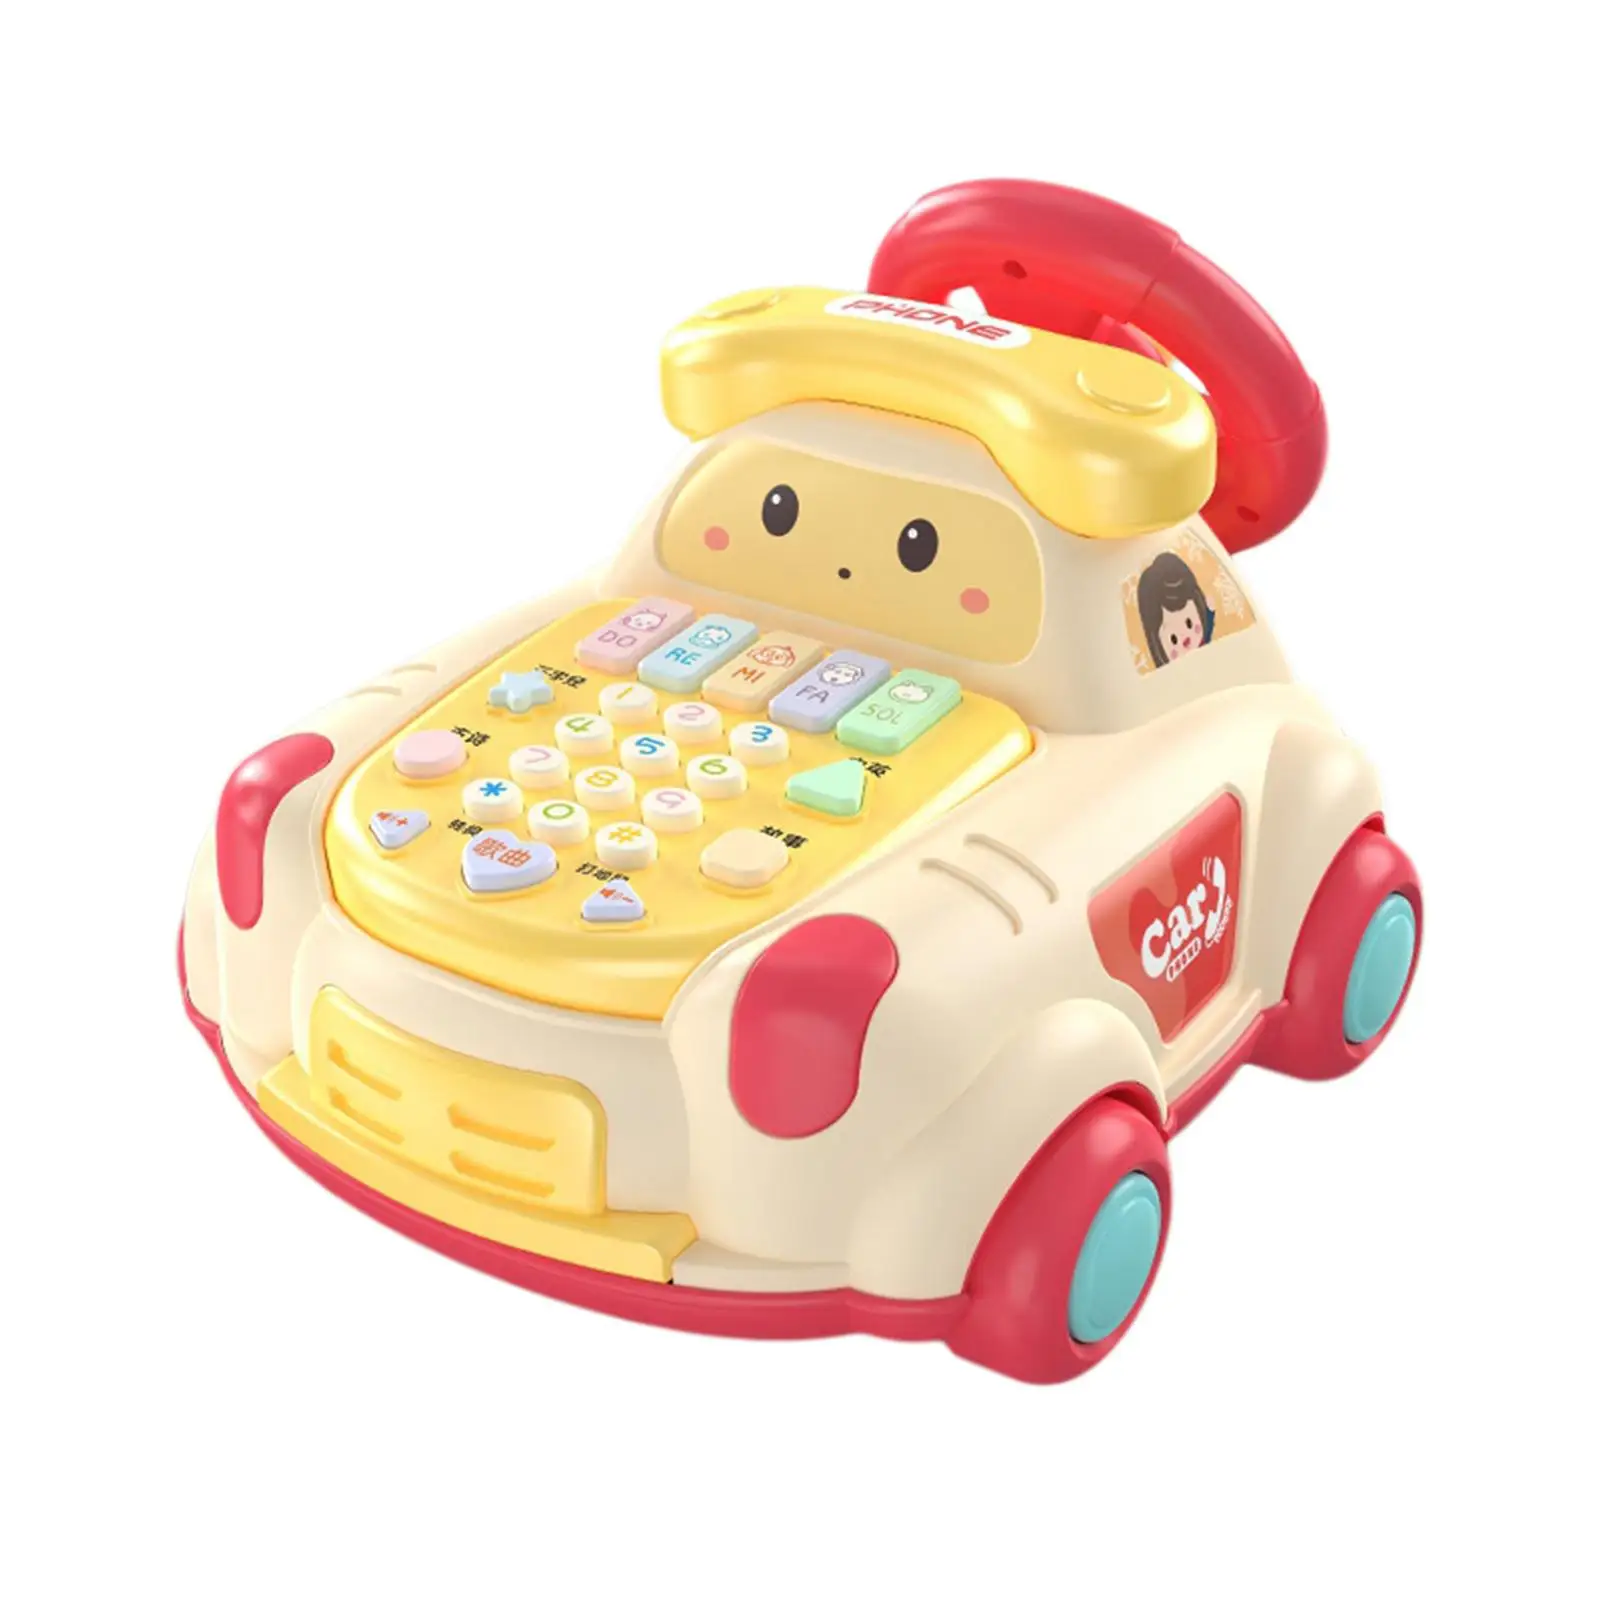 Baby Musical Toys Car Multifunctional Fine Motor Skills Pull Toys Music Light Phone Toy for Game Development Learning Education